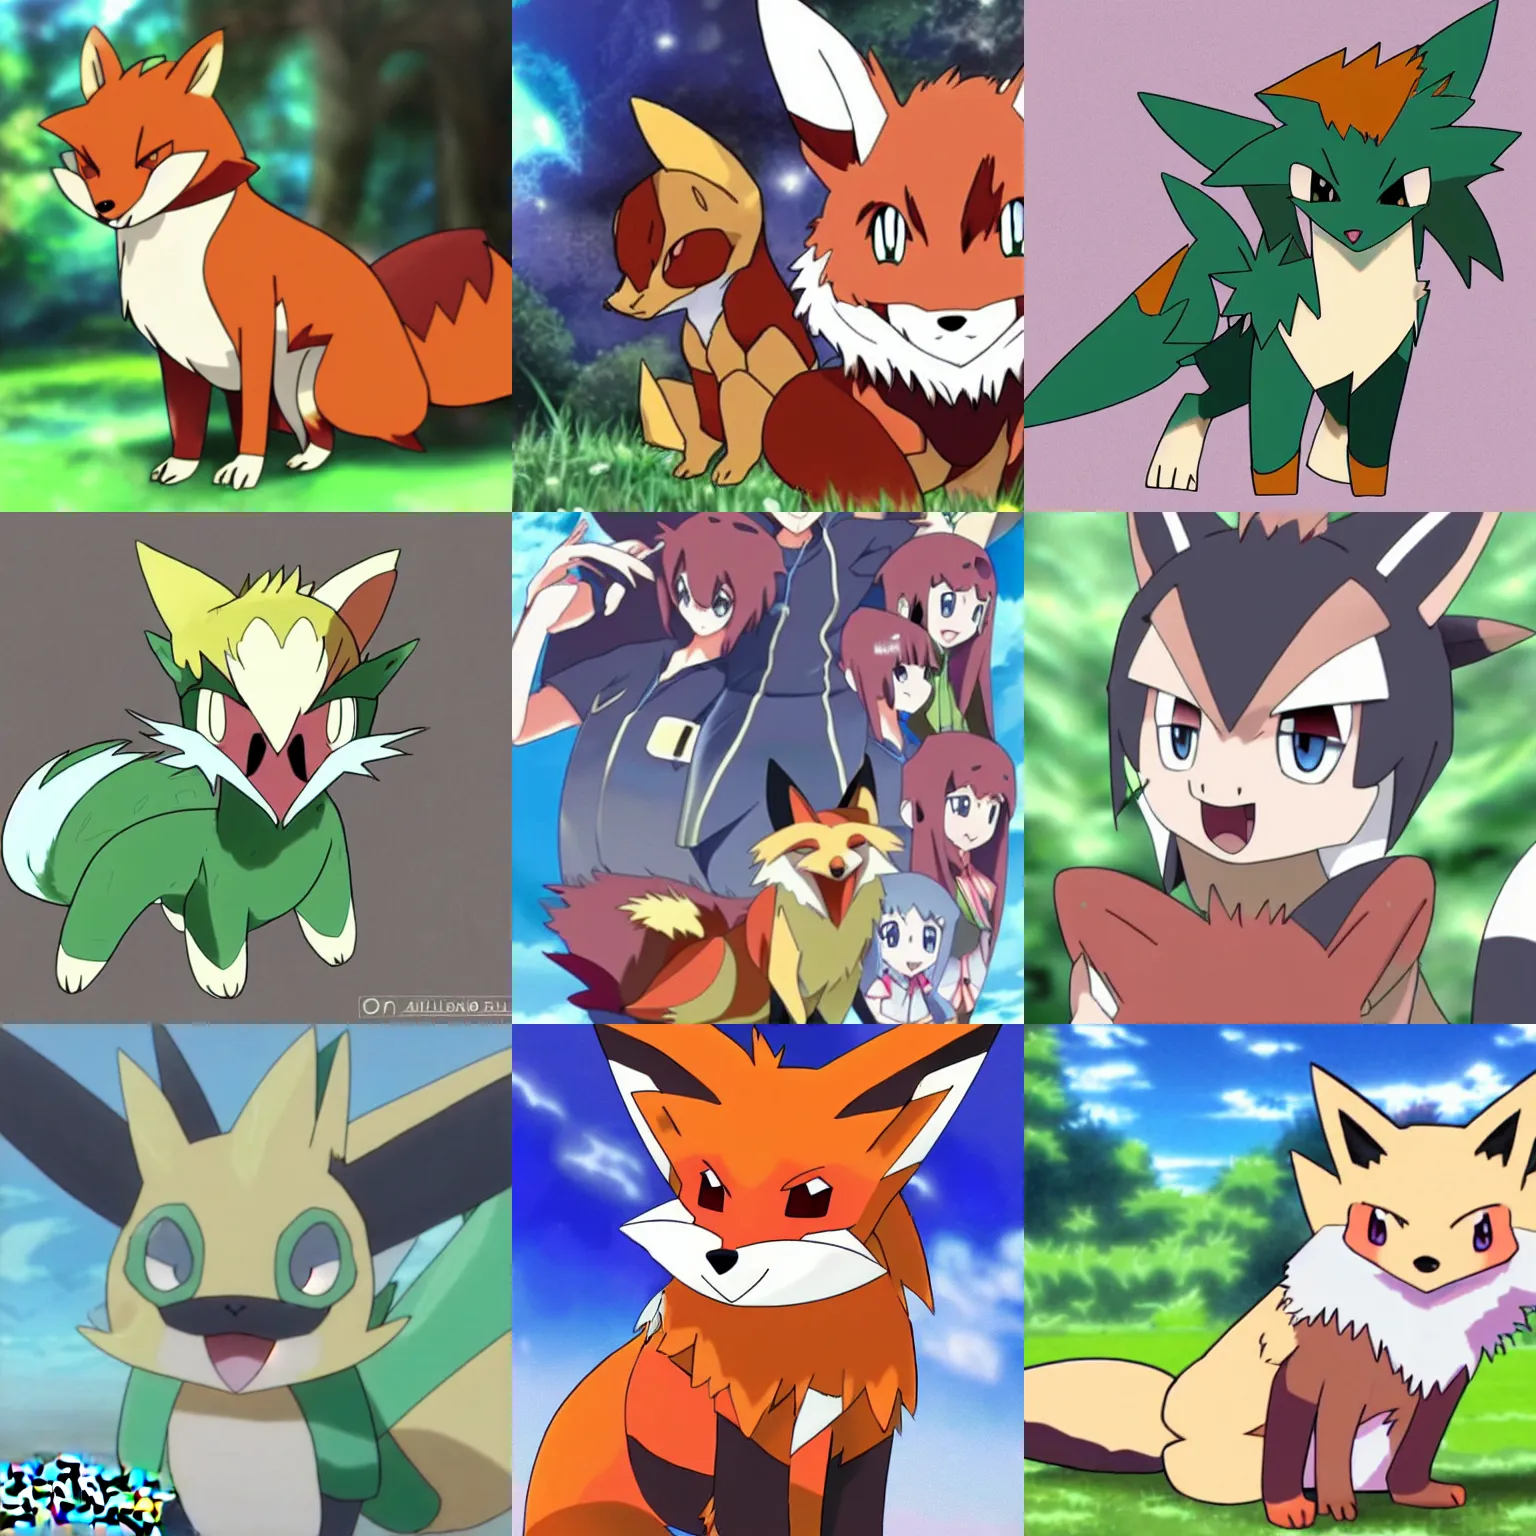 Prompt: one pokemon in anime cartoon style with features of a fox with green eyes